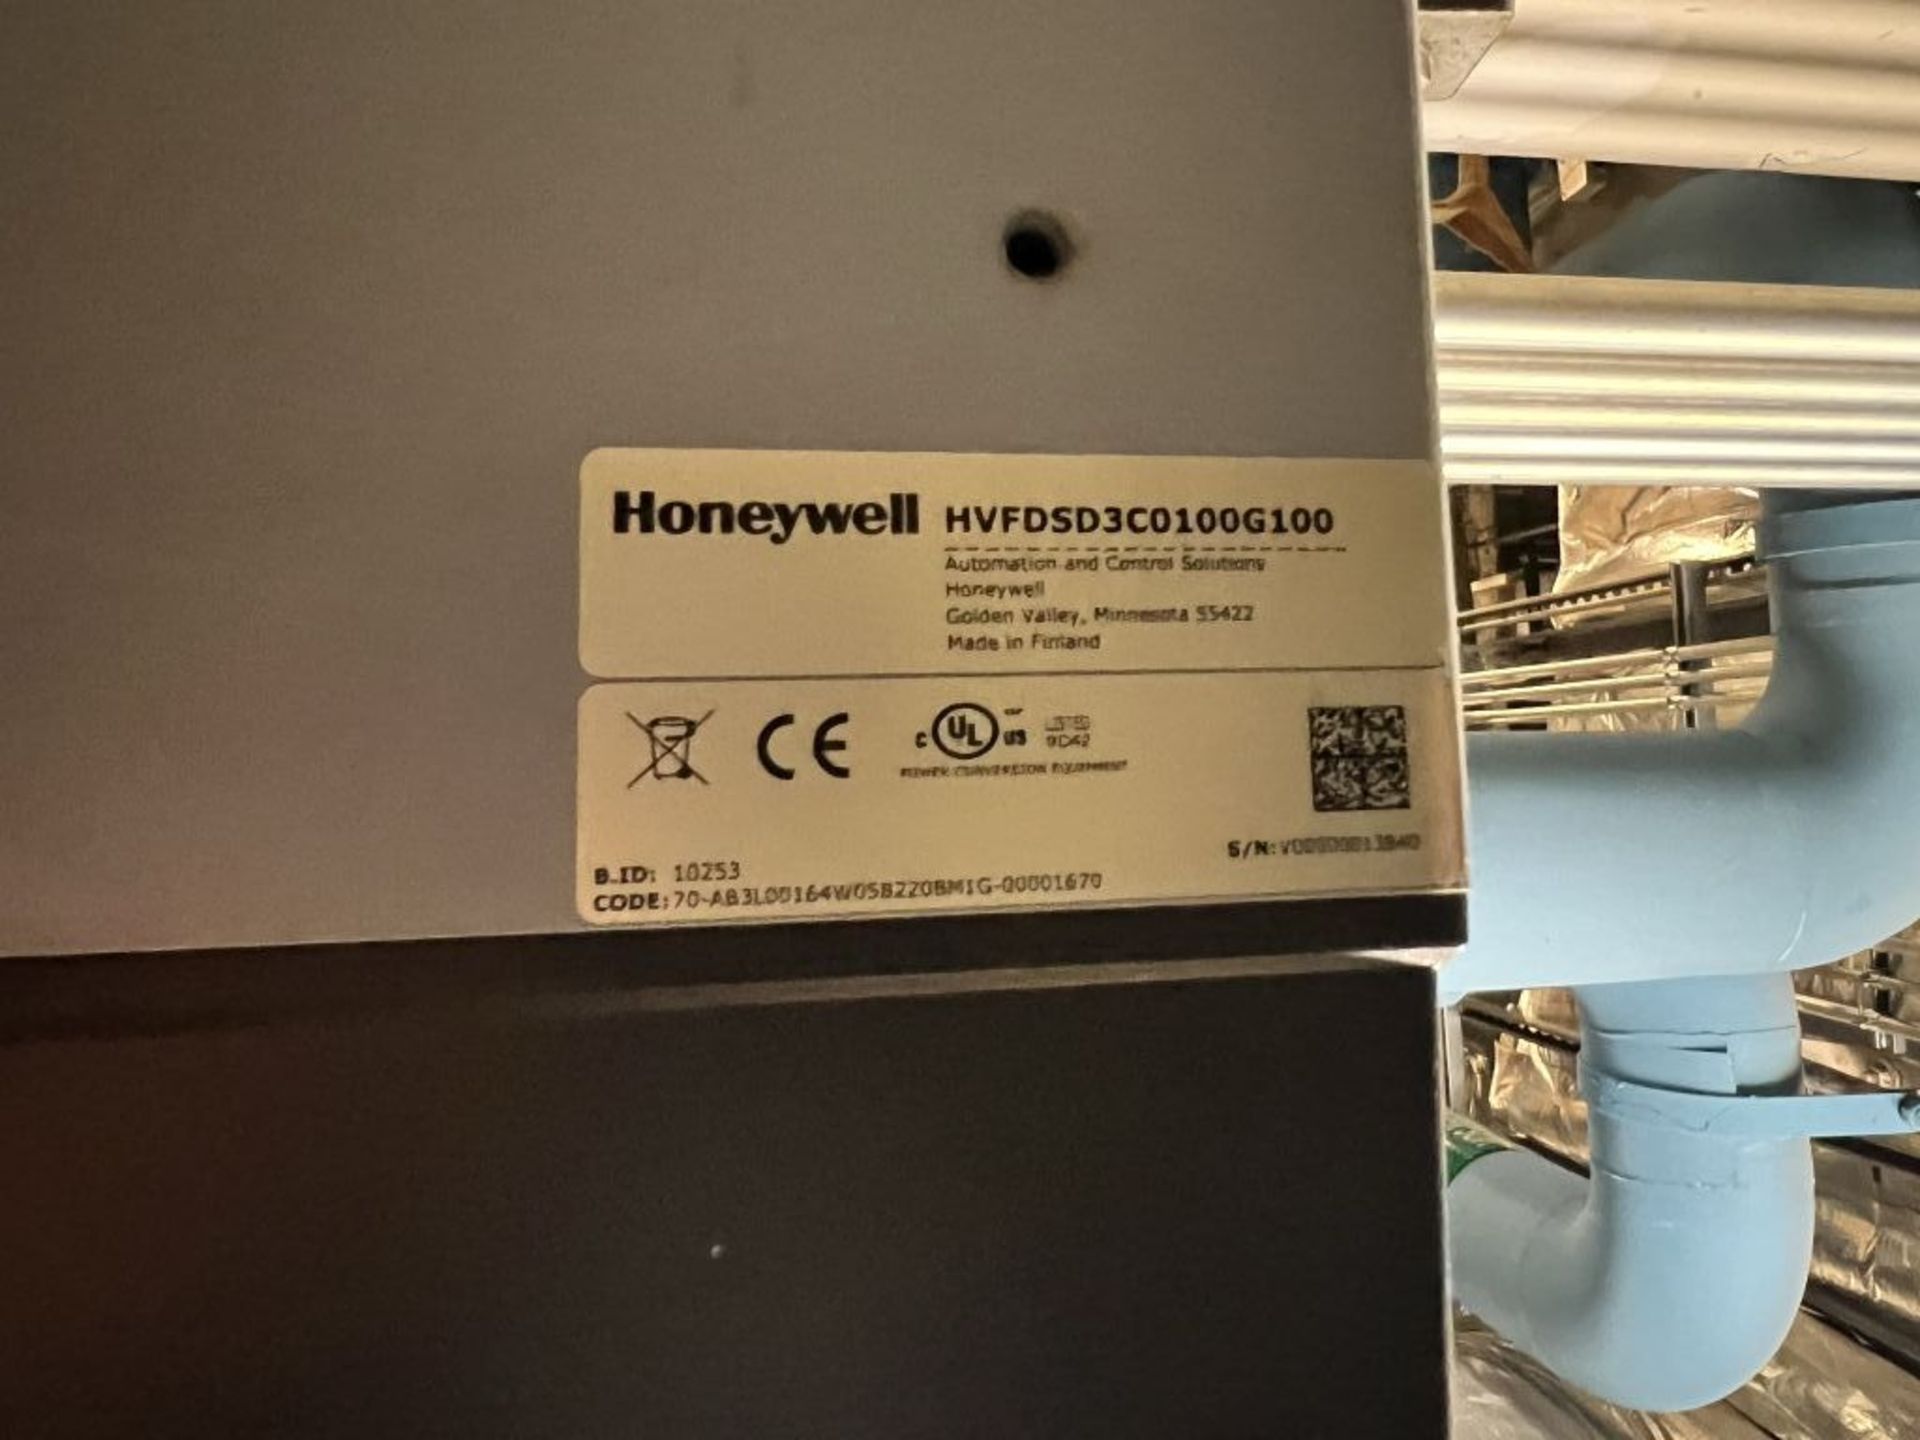 Spartanburg, SC - Honeywell Smart Variable Frequency Drive - Image 3 of 4